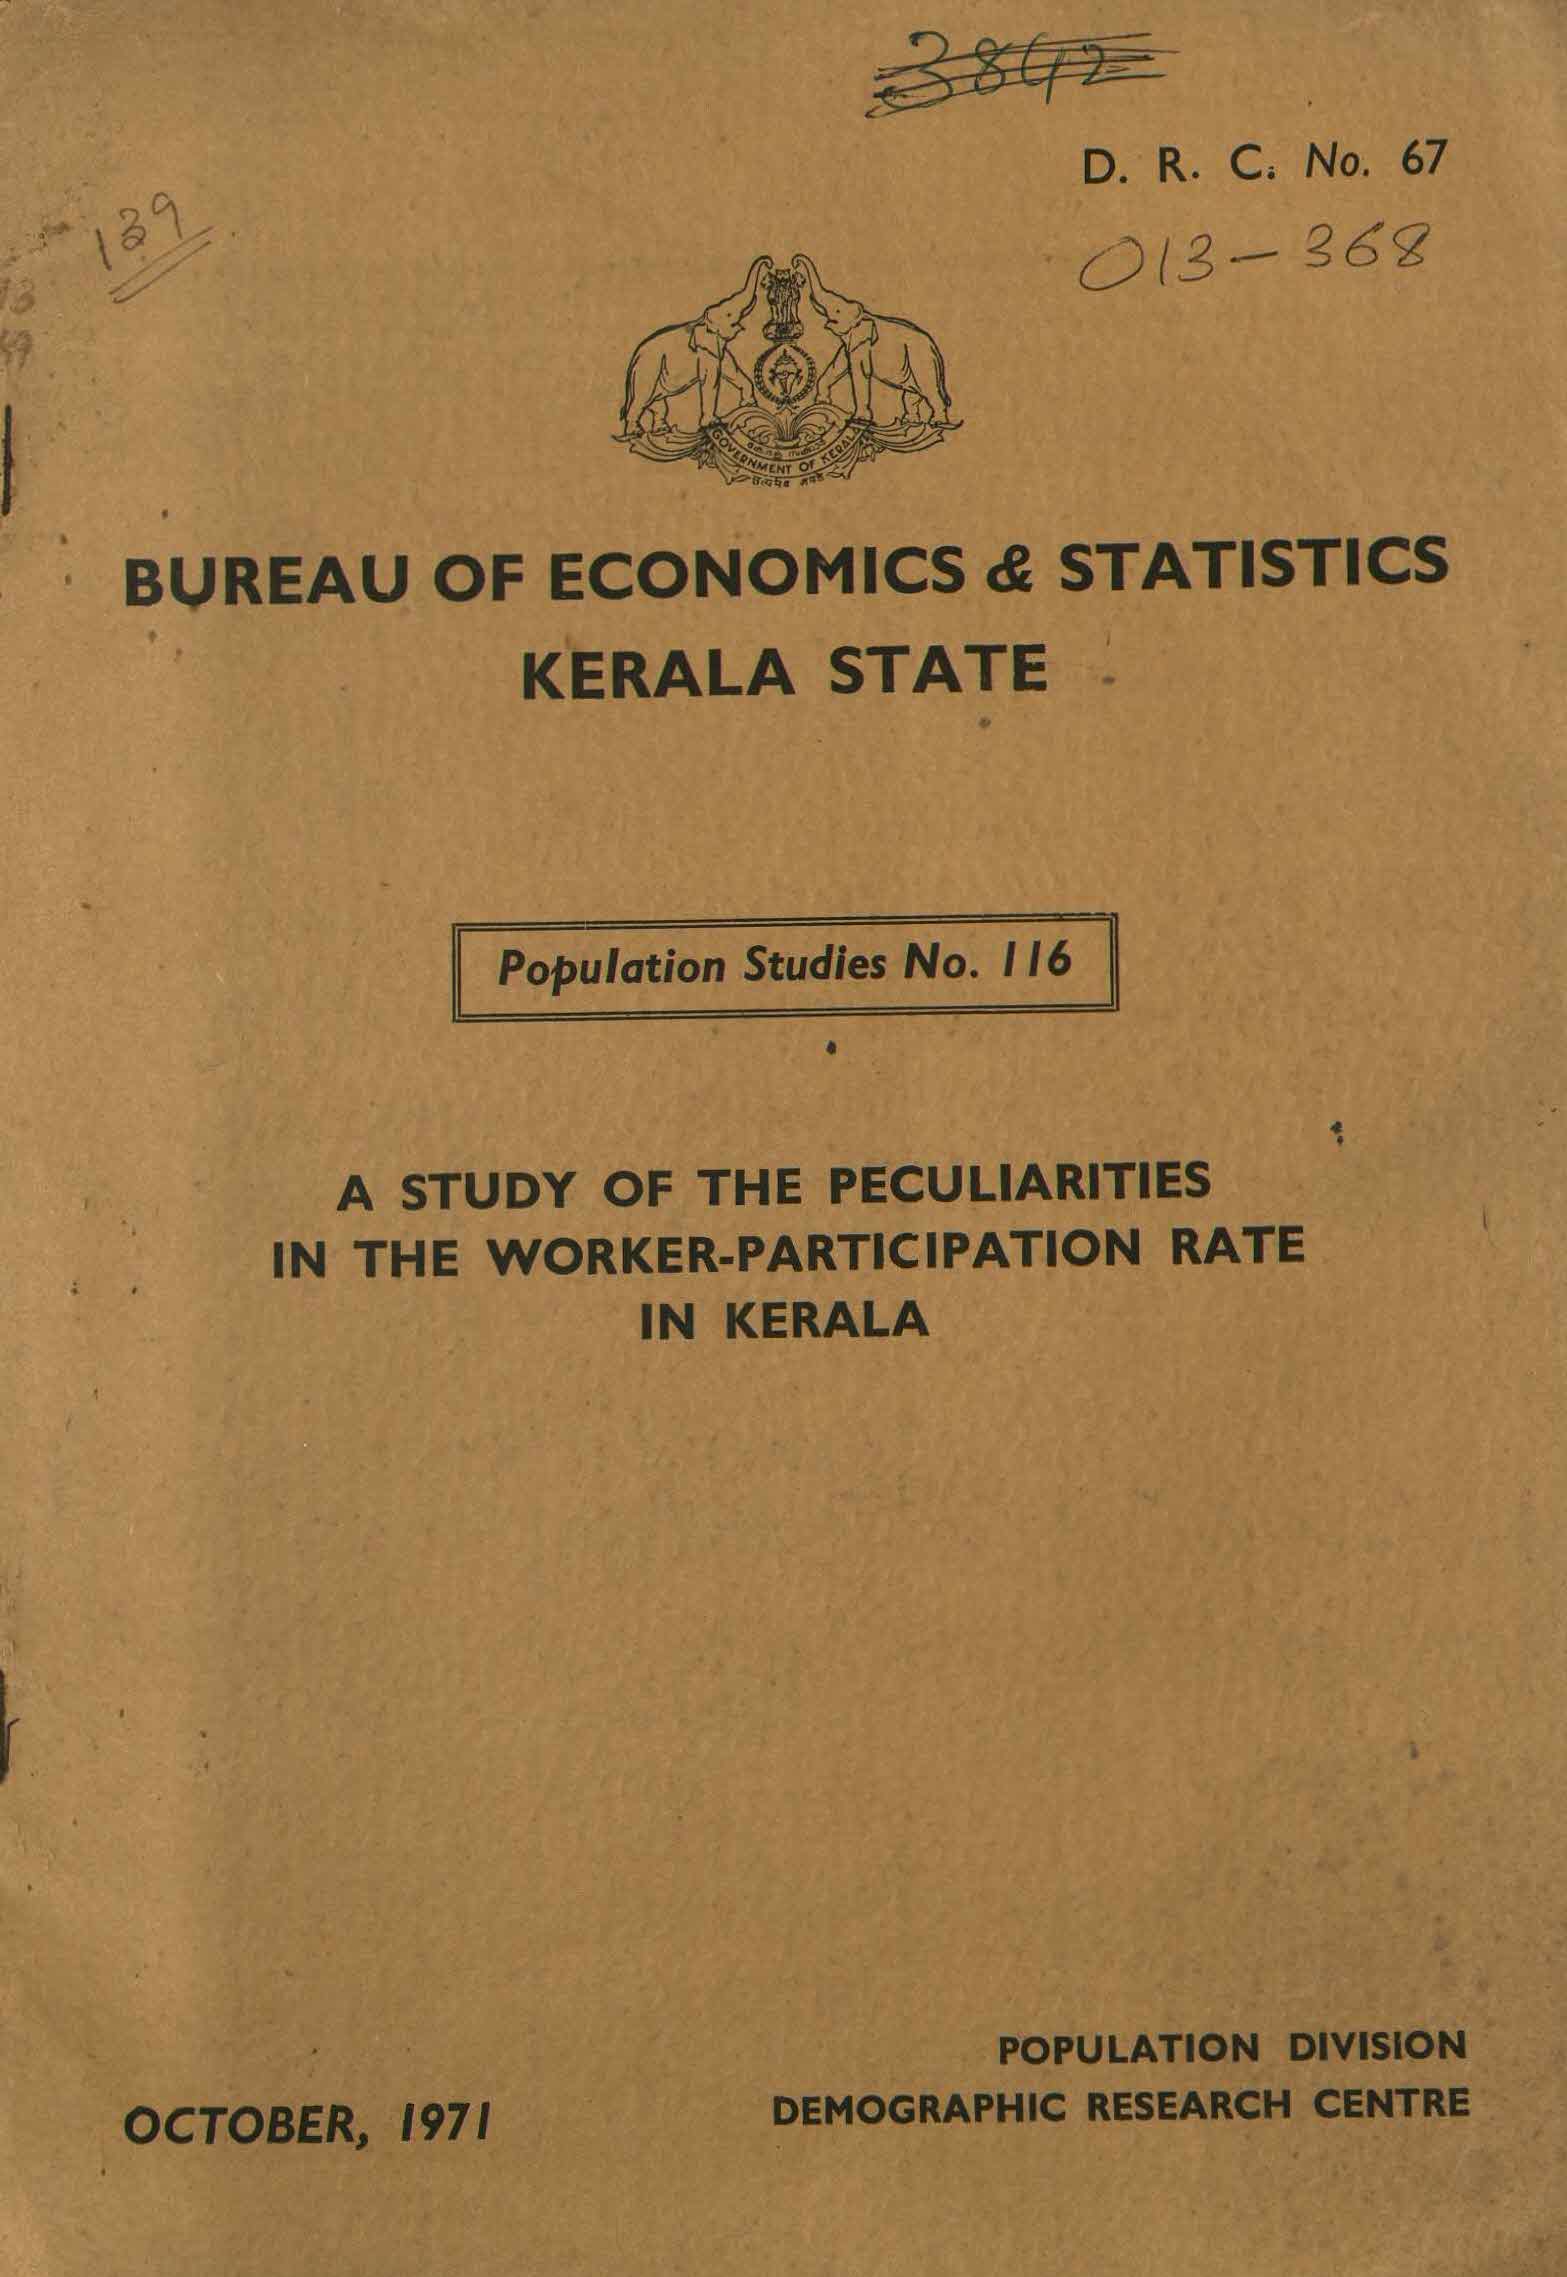 A Study of Peculiarities in the Worker Participation Rate in Kerala